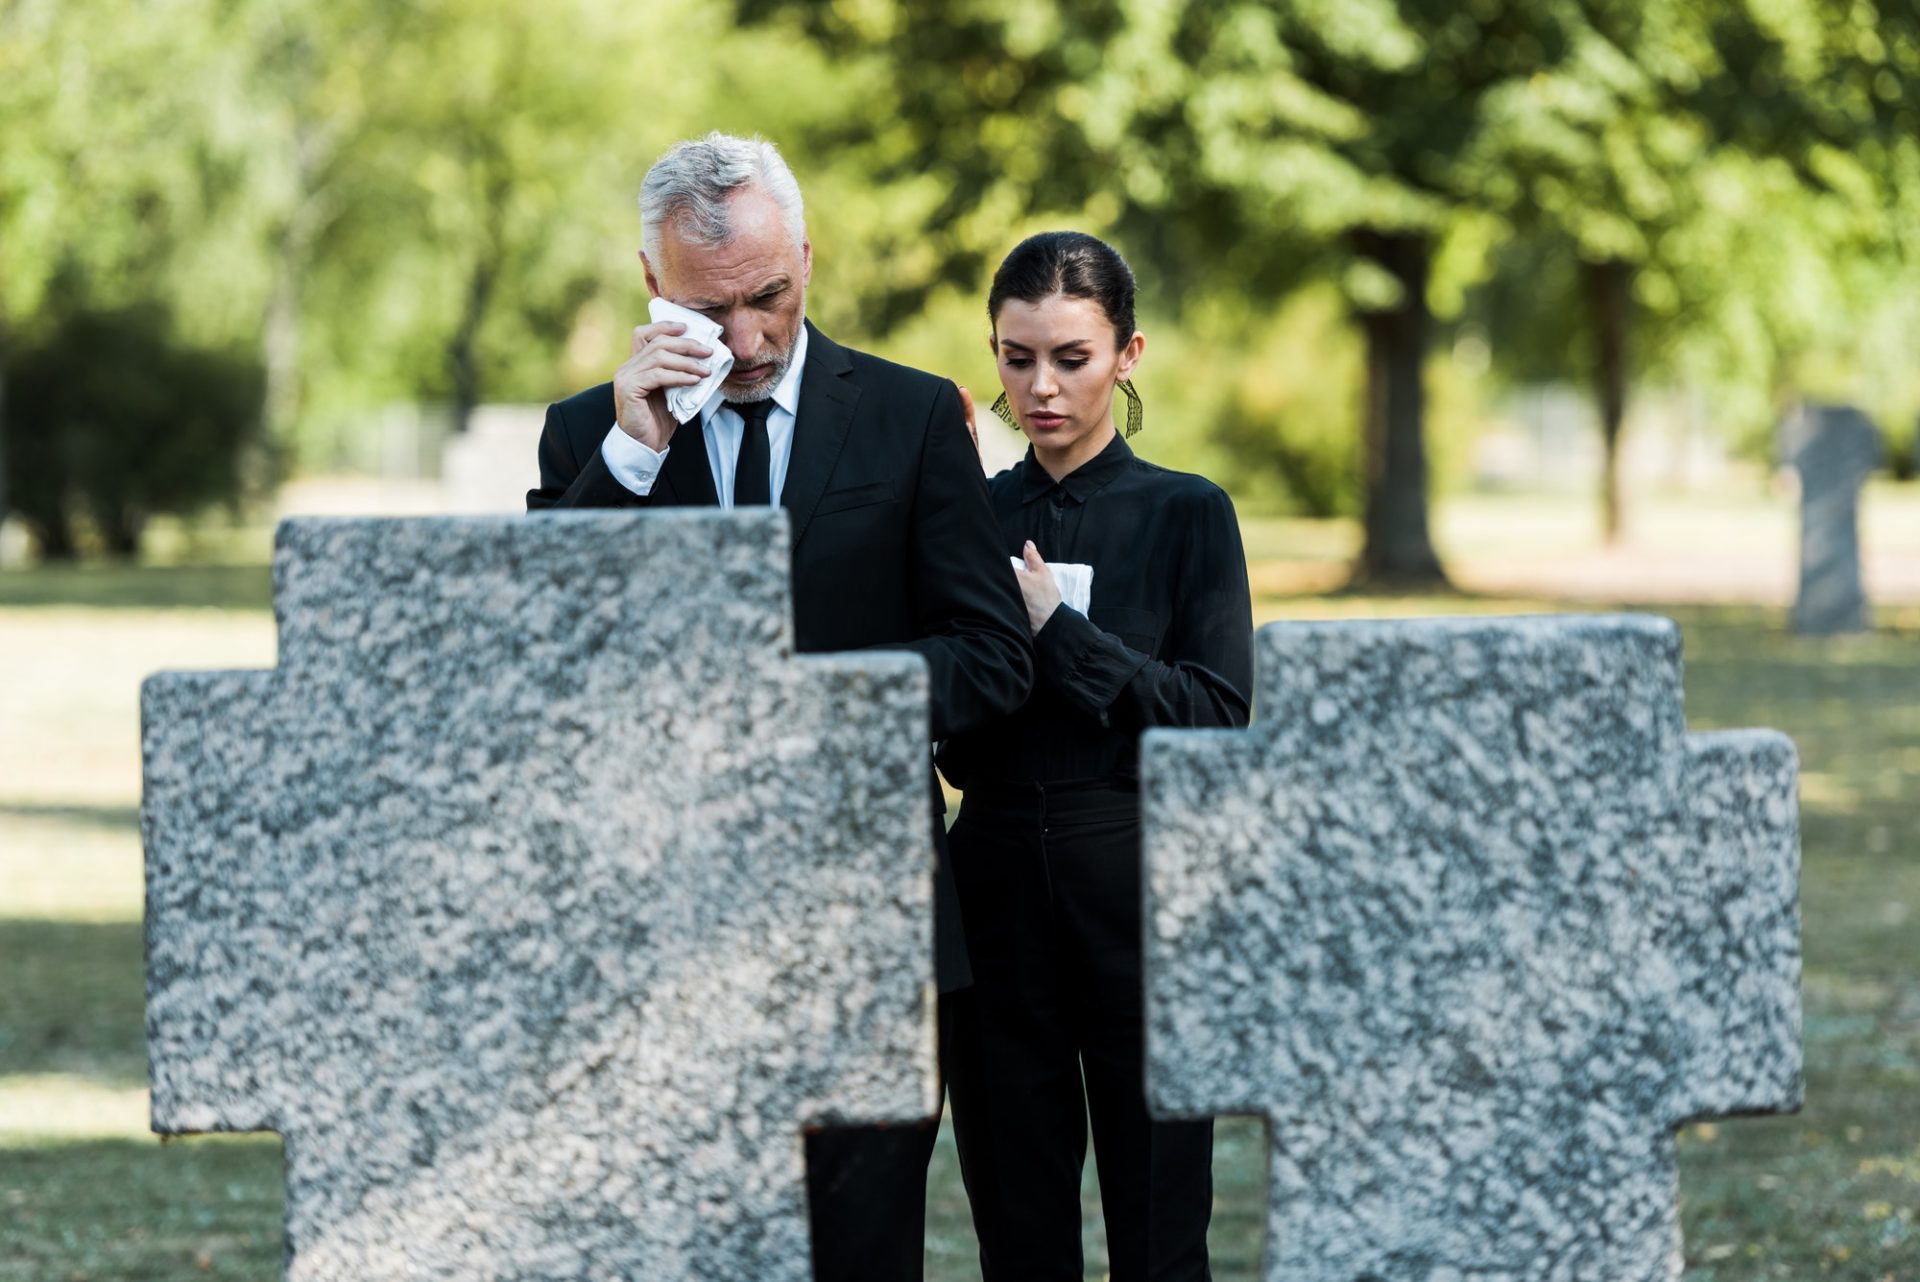 selective-focus-of-upset-man-crying-near-woman-on-funeral-e1636904714900.jpg